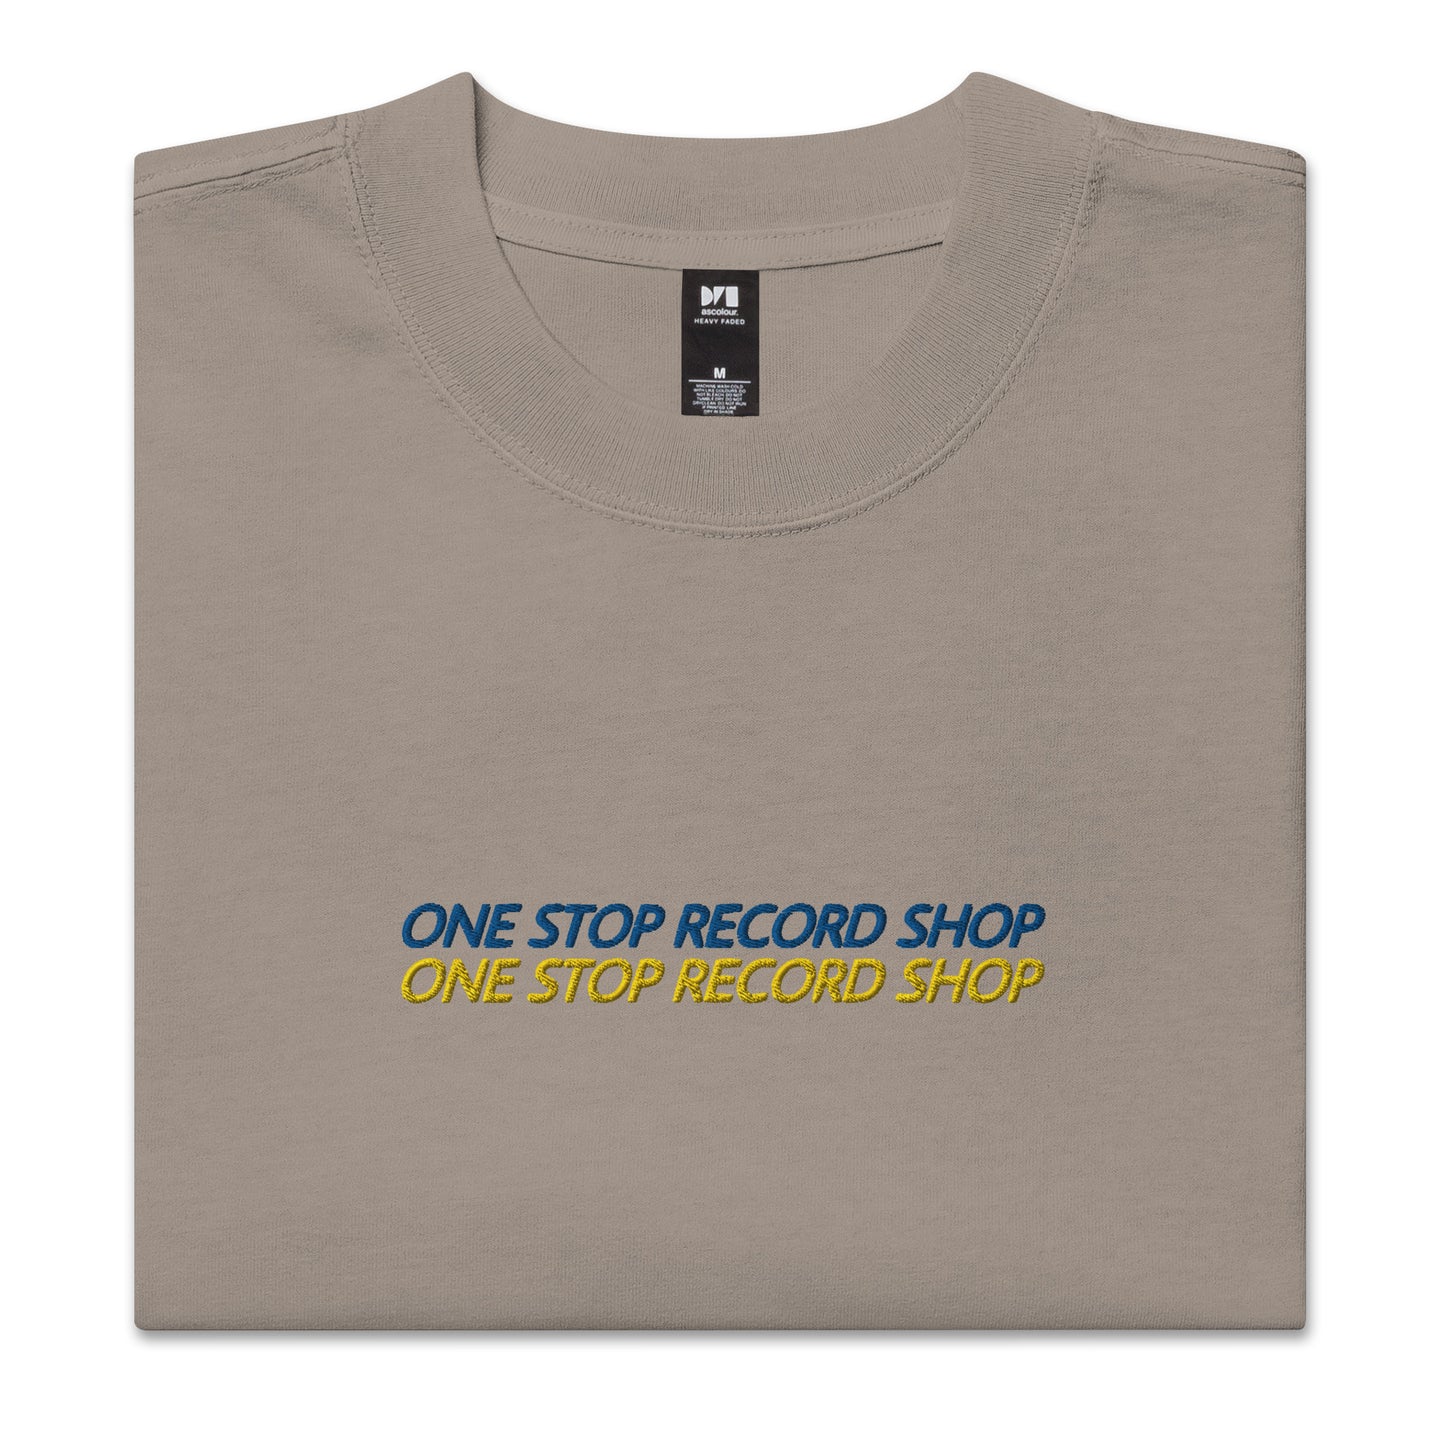 Oversized Faded One Stop Record Shop Tee